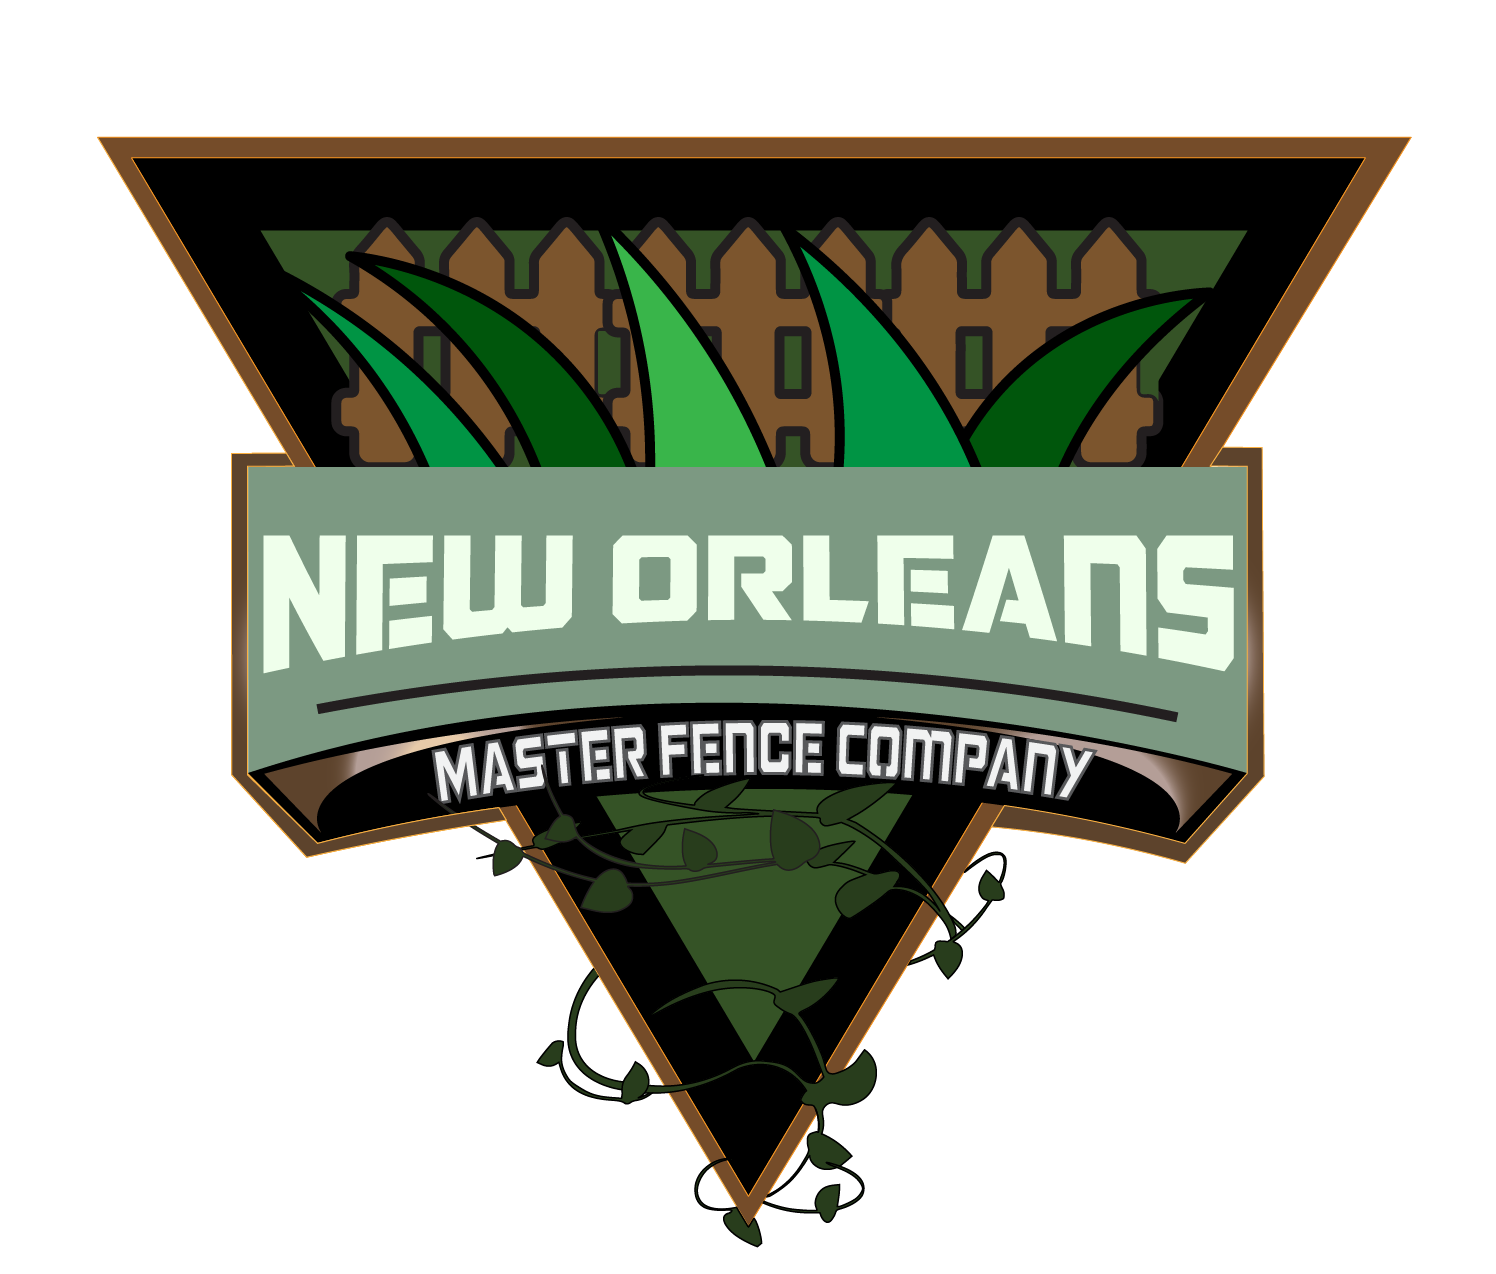 Backyard Fence Installation Services In New Orleans La Backyard Fence Styles